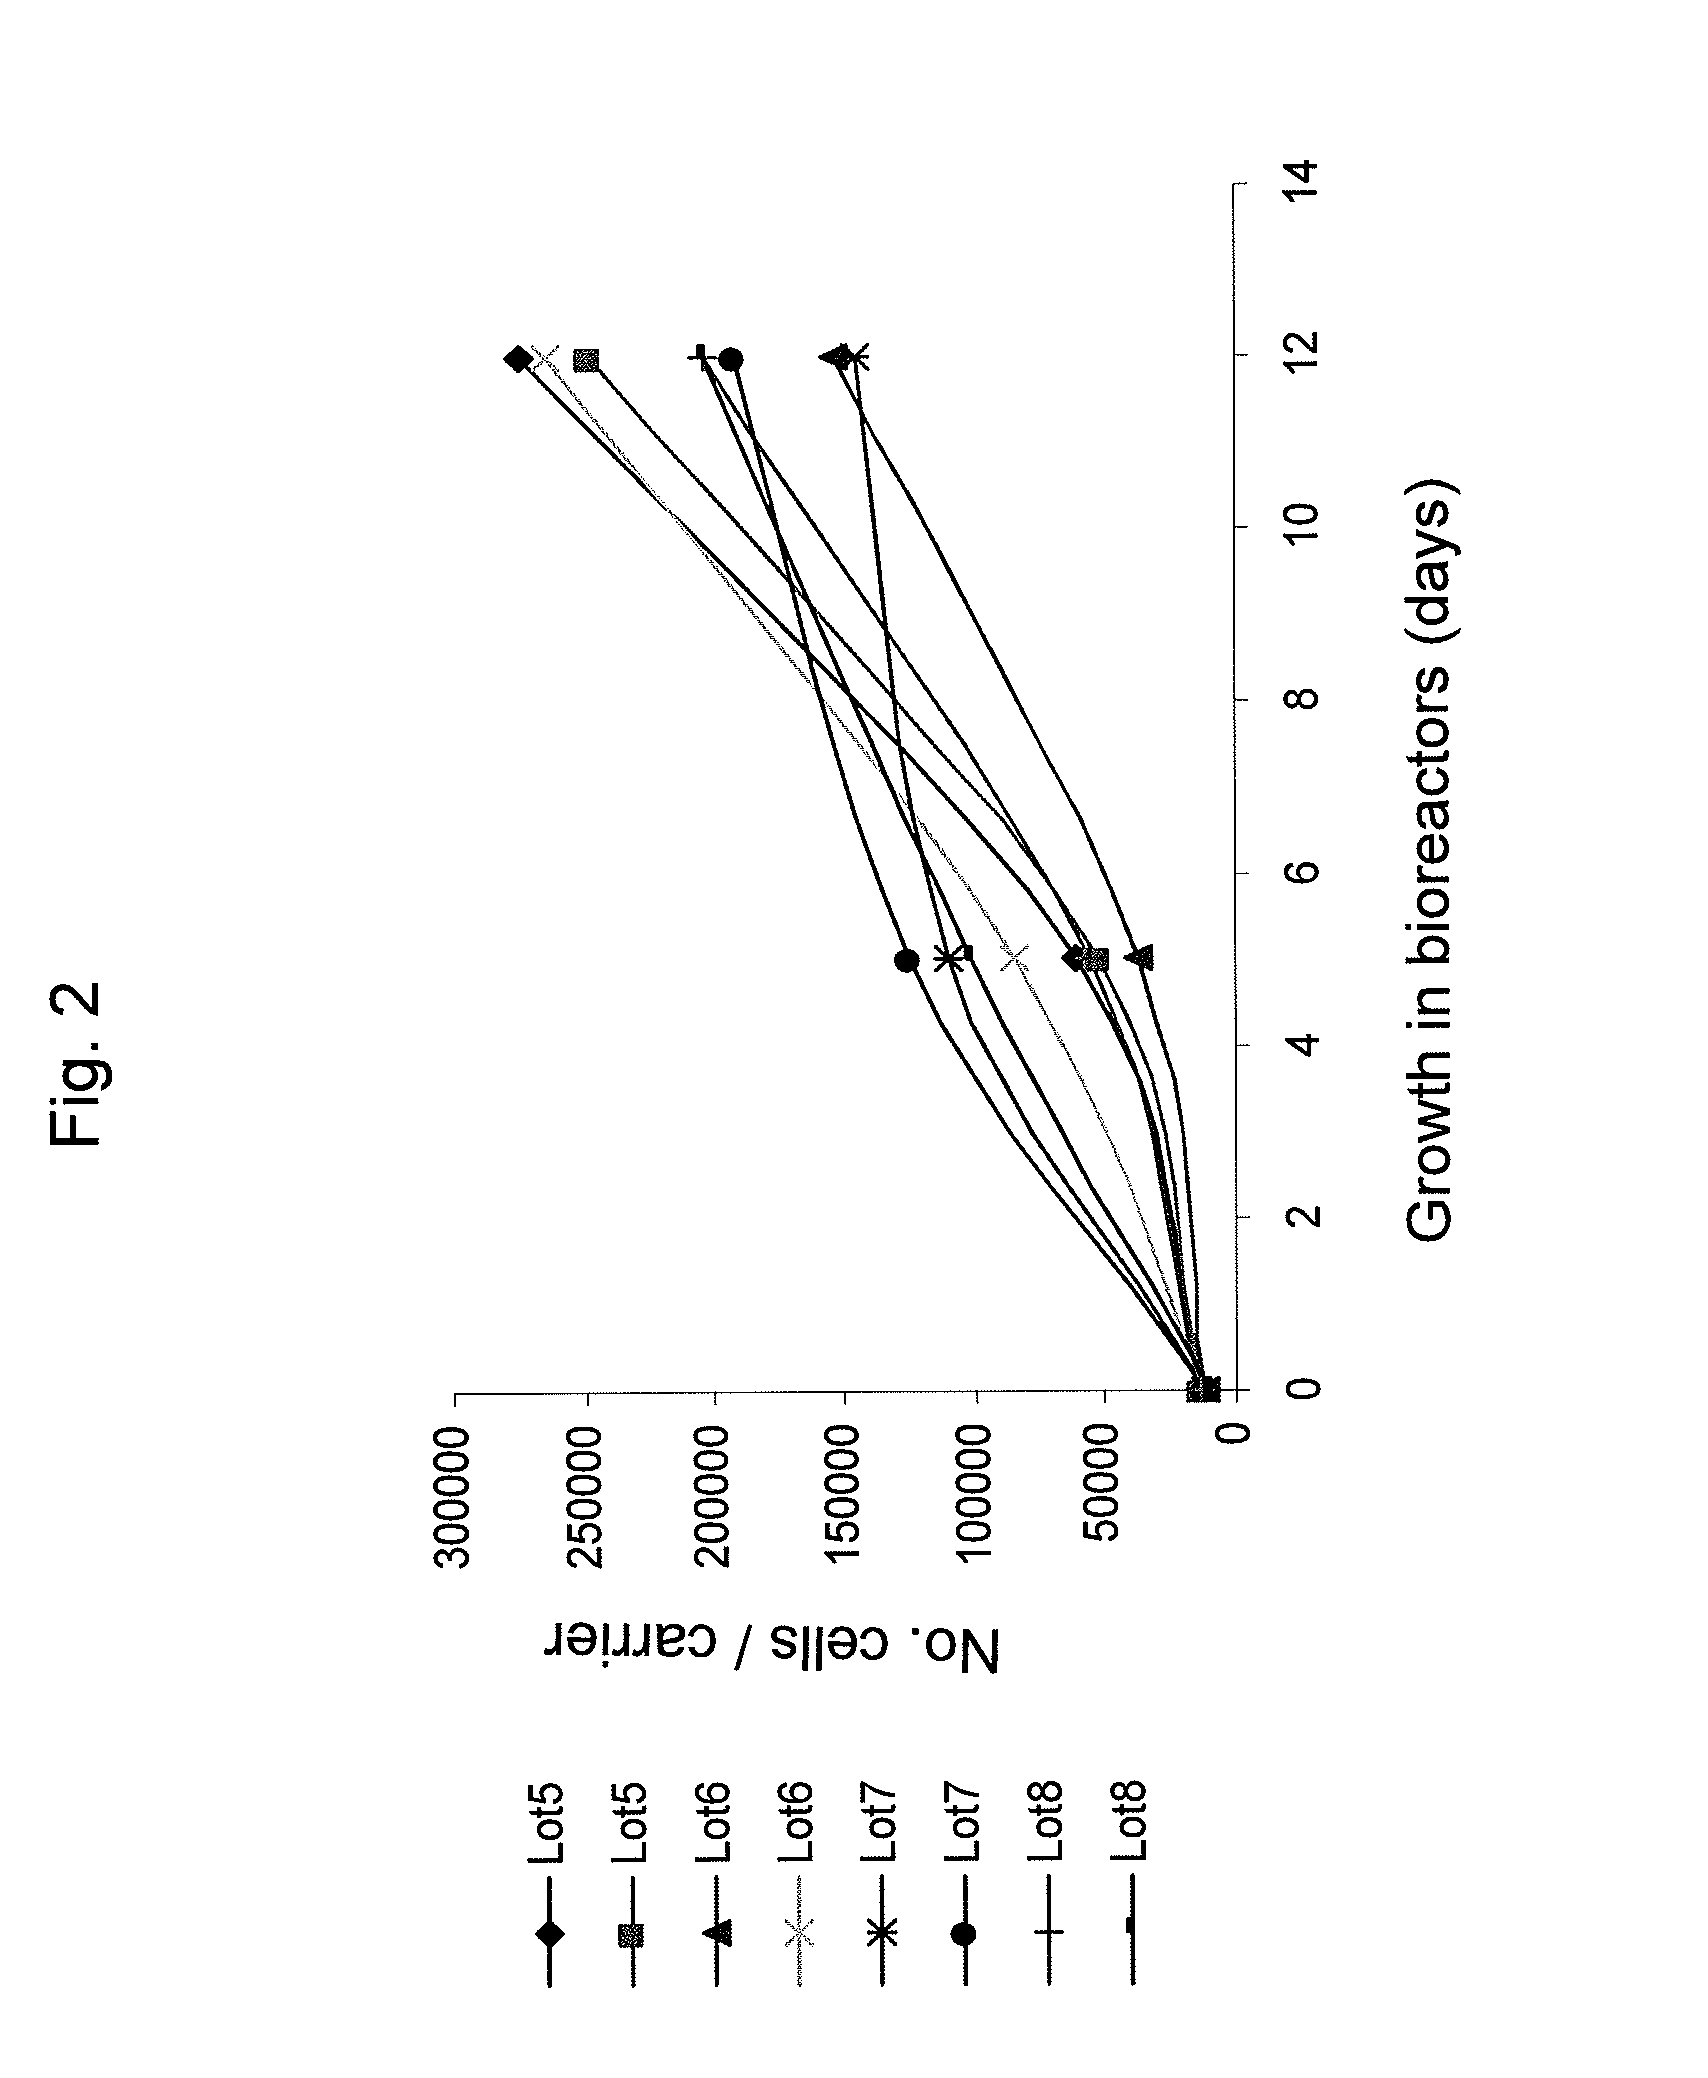 Methods for cell expansion and uses of cells and conditioned media produced thereby for therapy